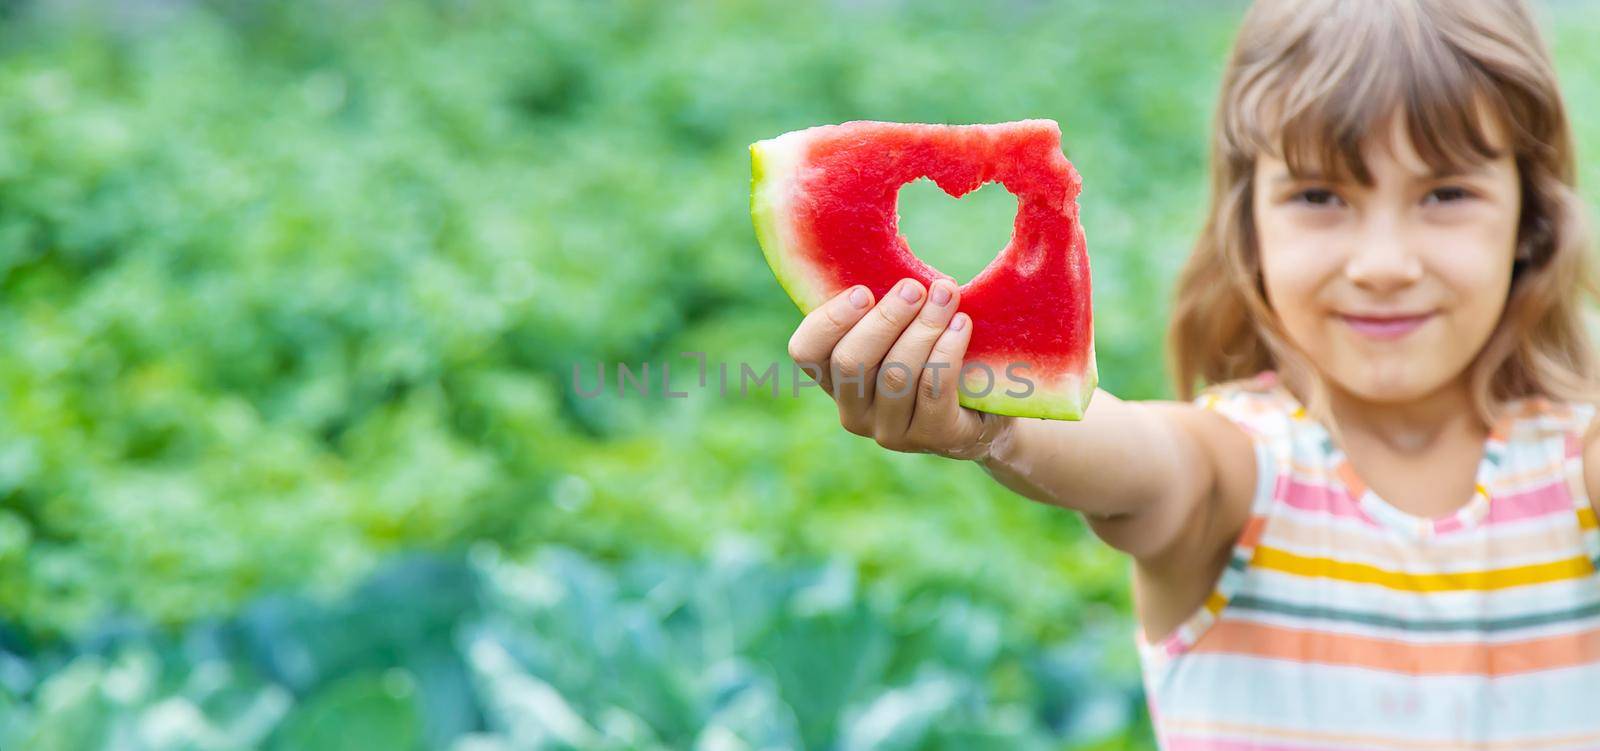 A child on a picnic eats a watermelon. Selective focus. Food.